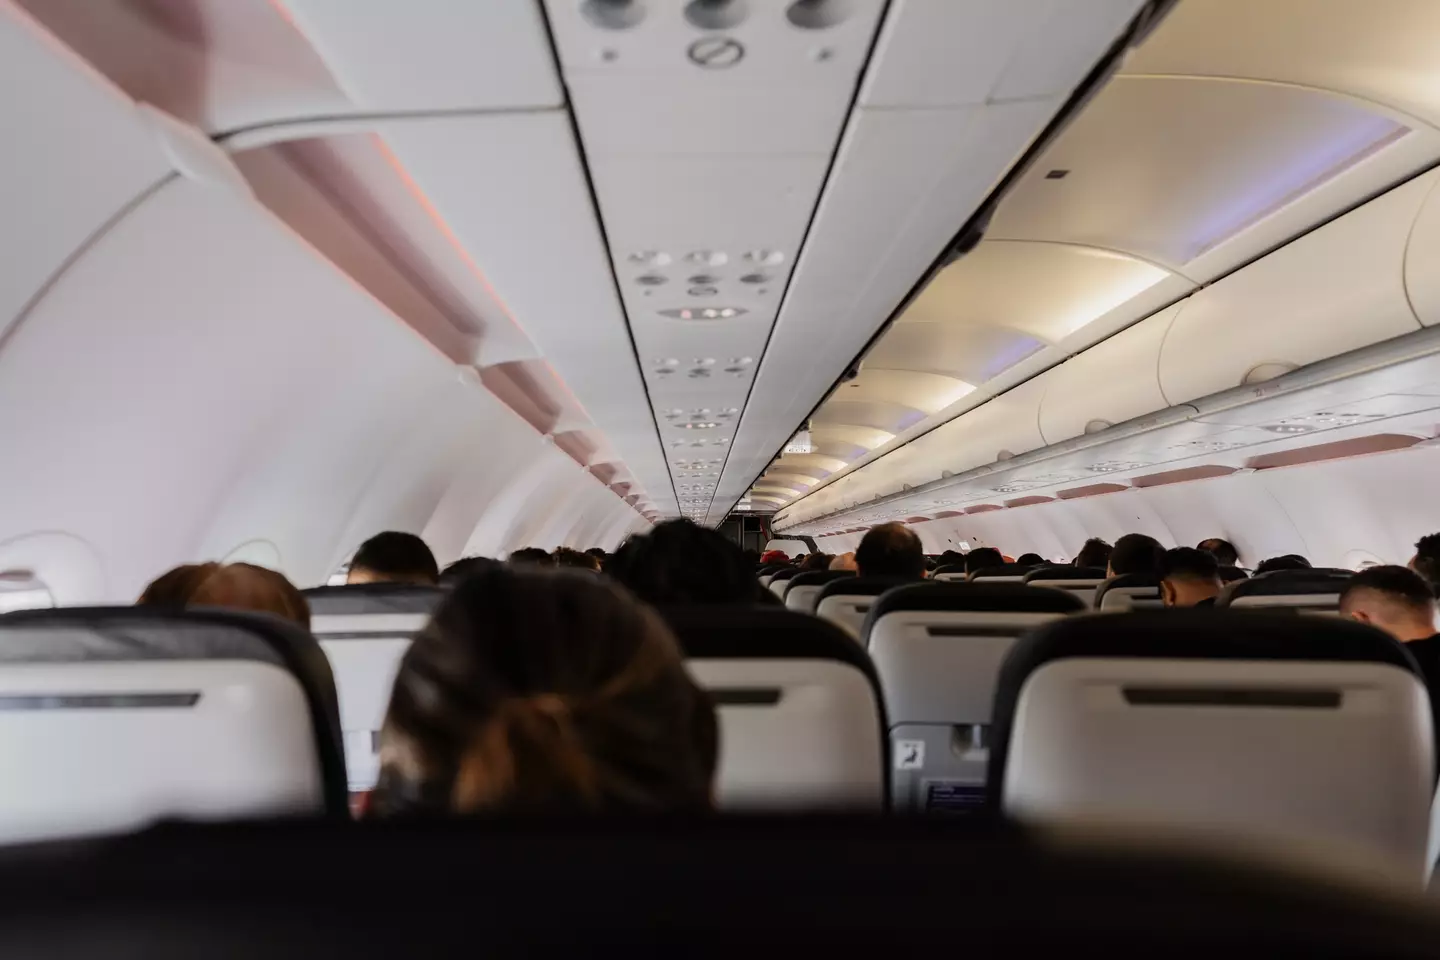 The dirtiest part of a plane has been revealed.